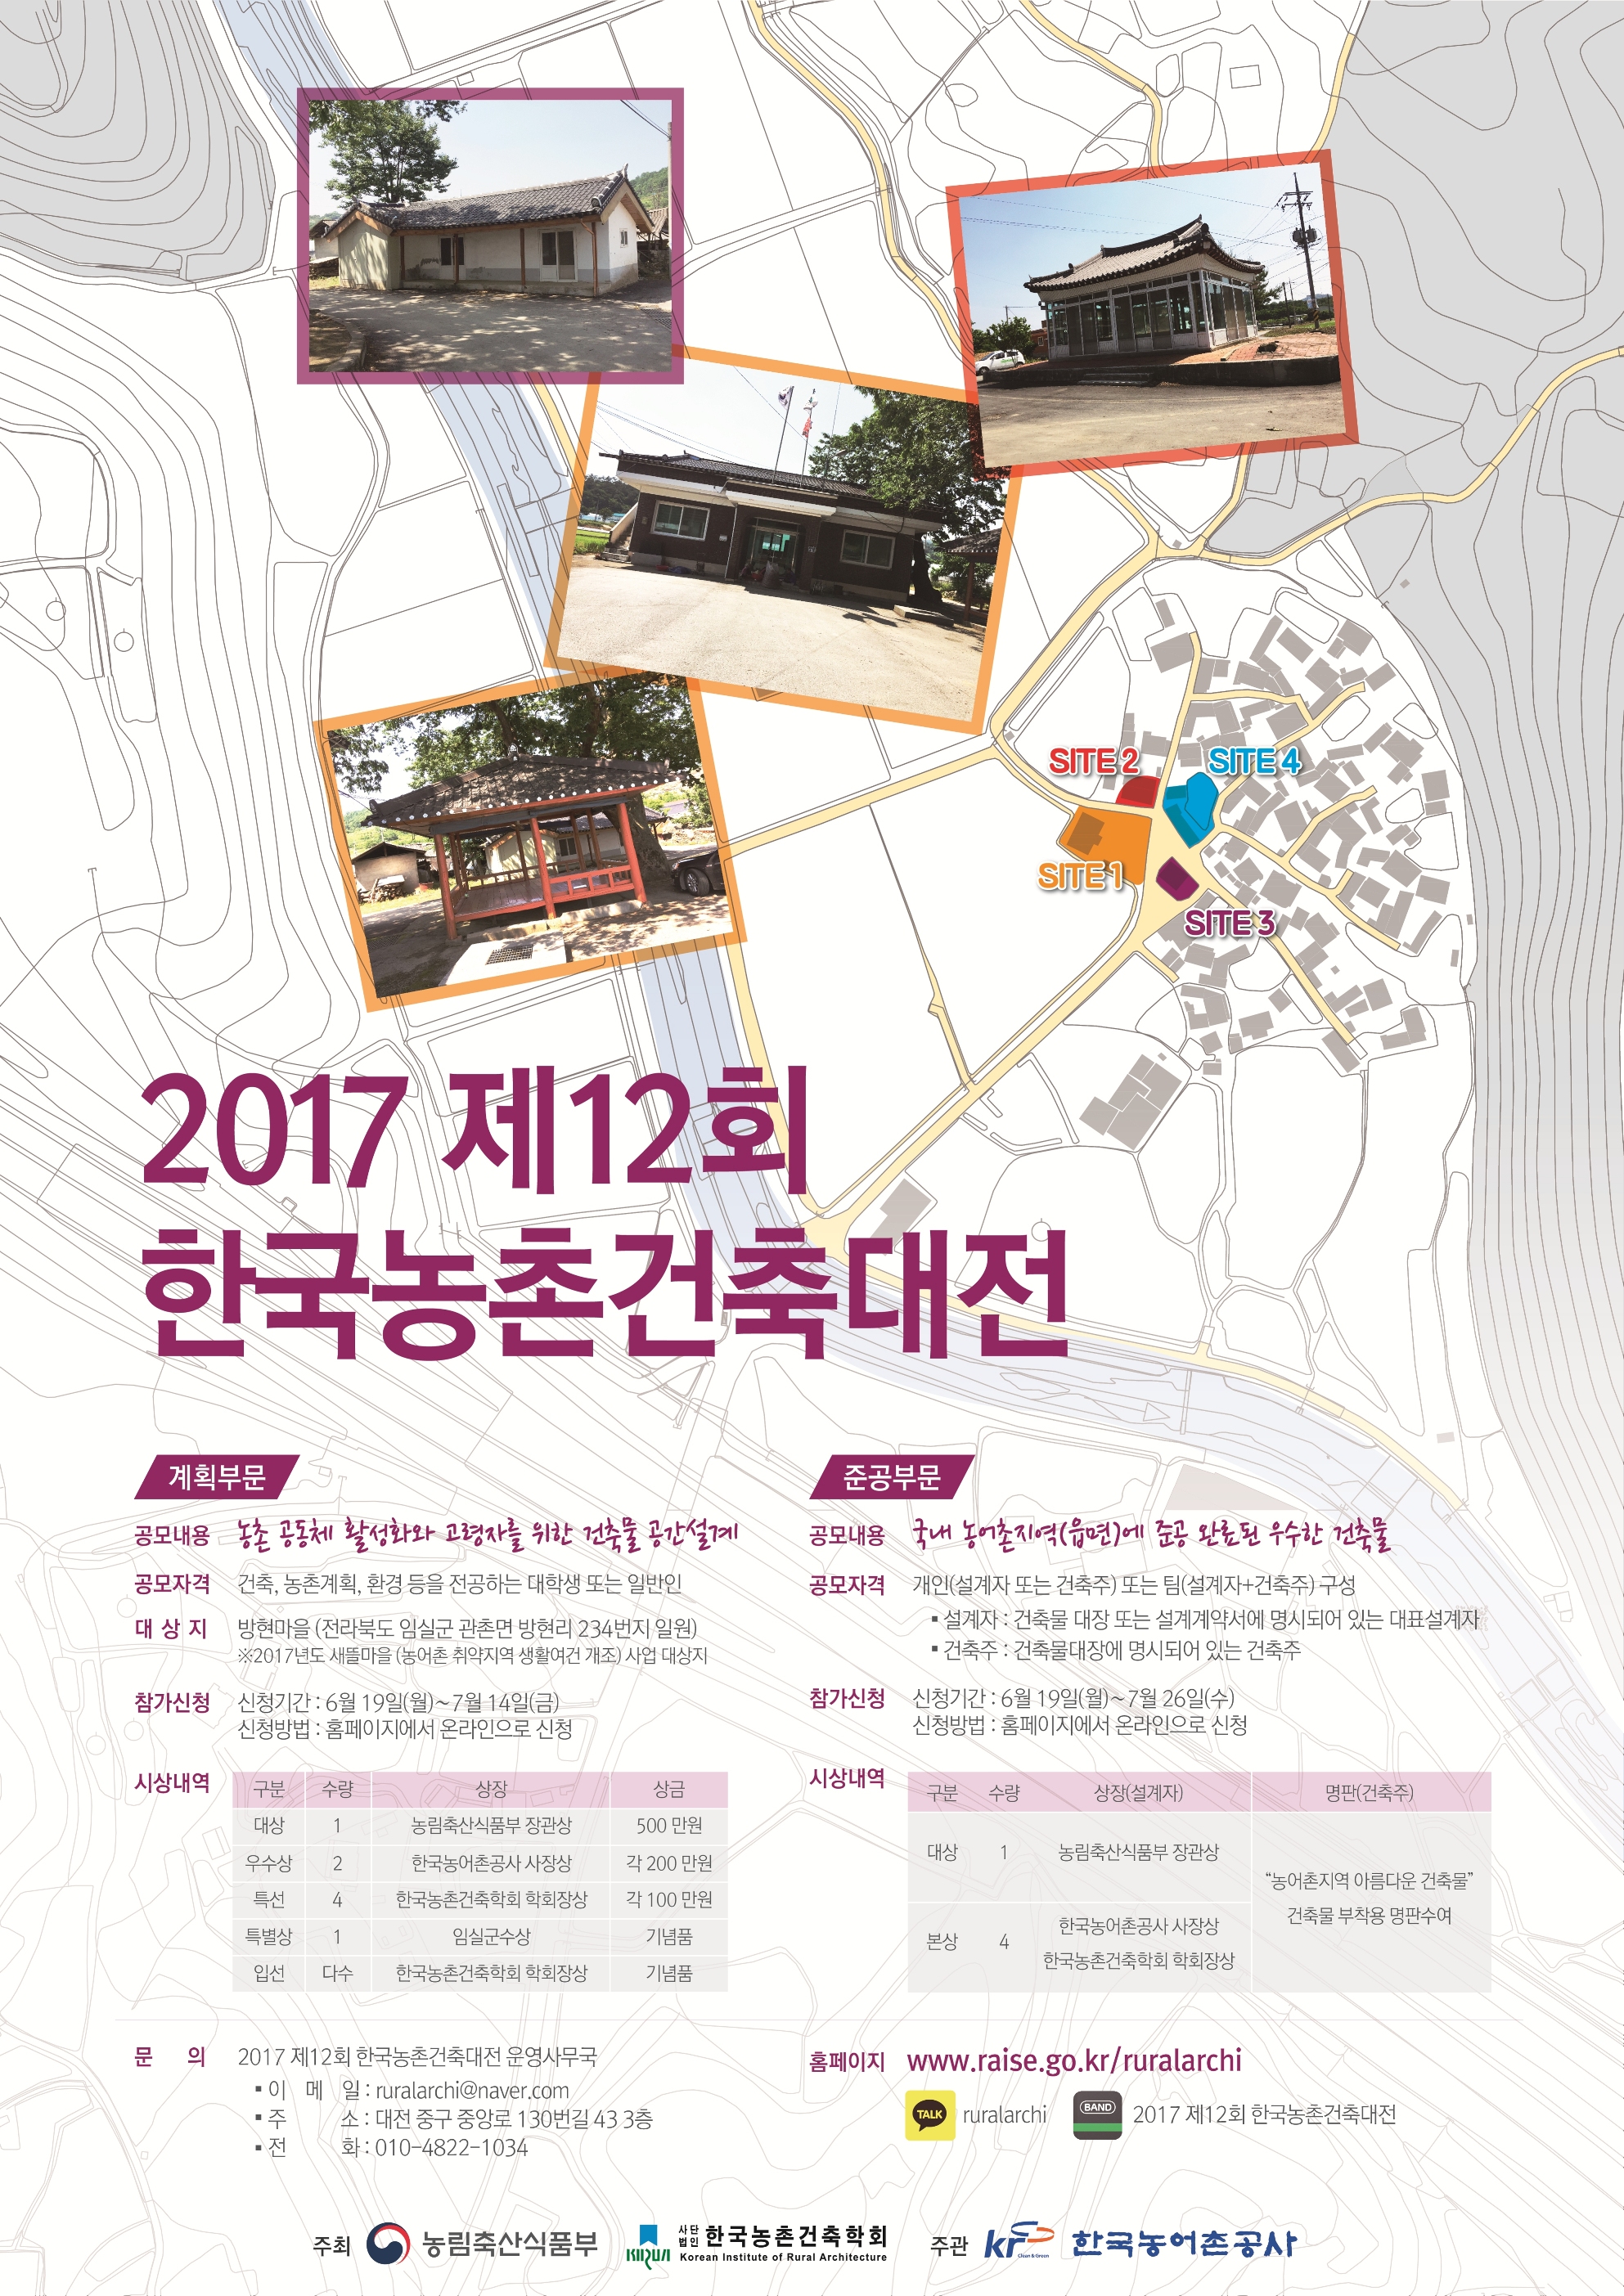 You are currently viewing 2017 제12회 한국농촌건축대전 공모